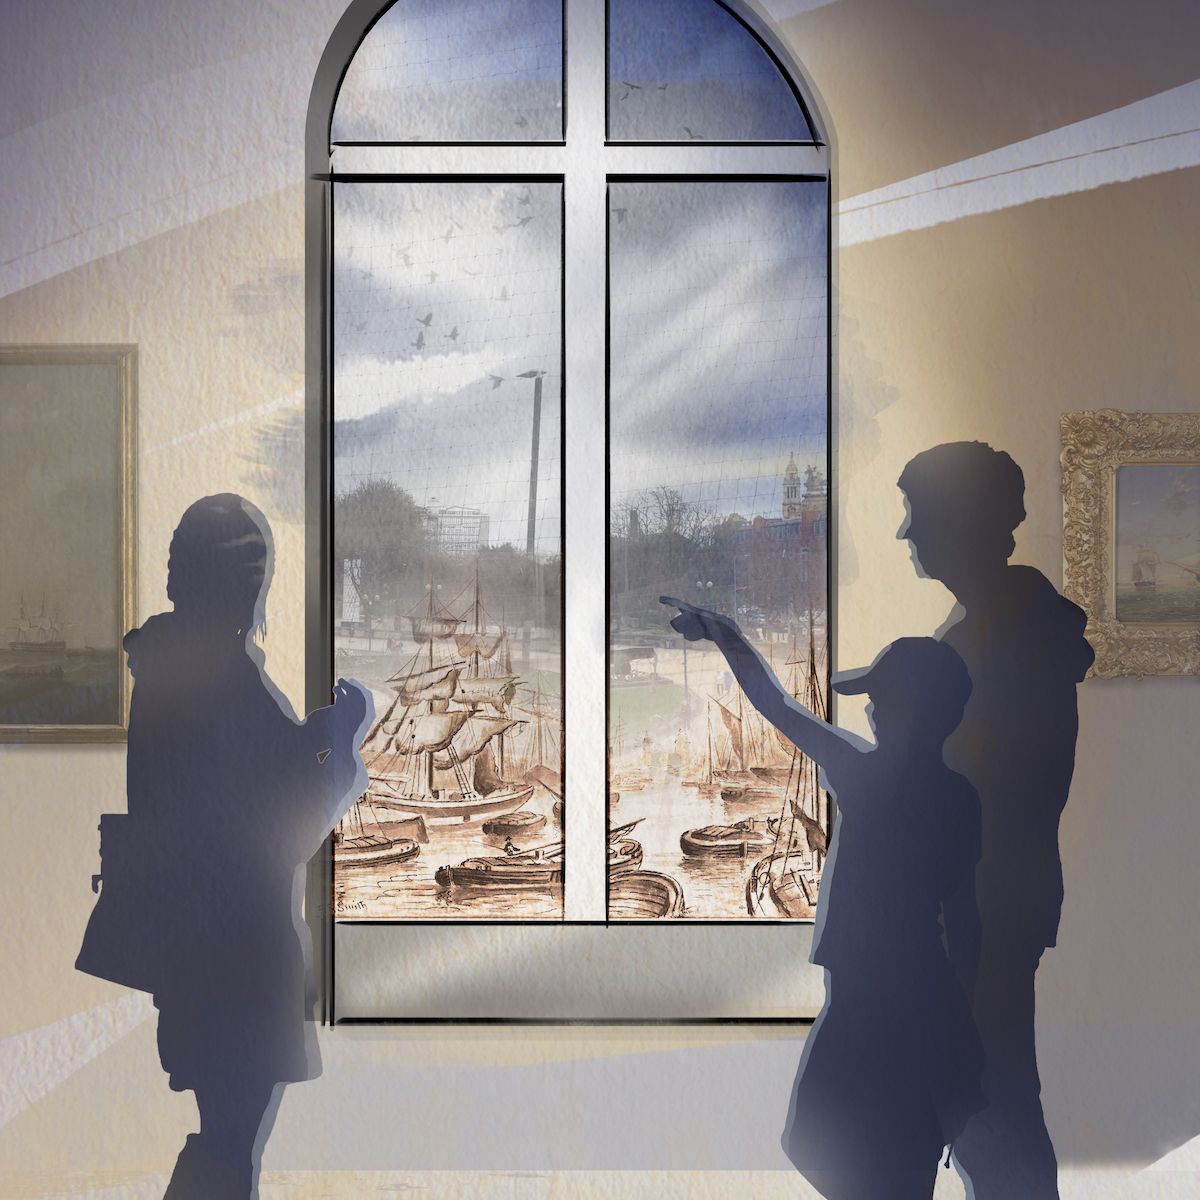 A artists' impression of a window projection looking at when Queens Gardens was a busy dock.